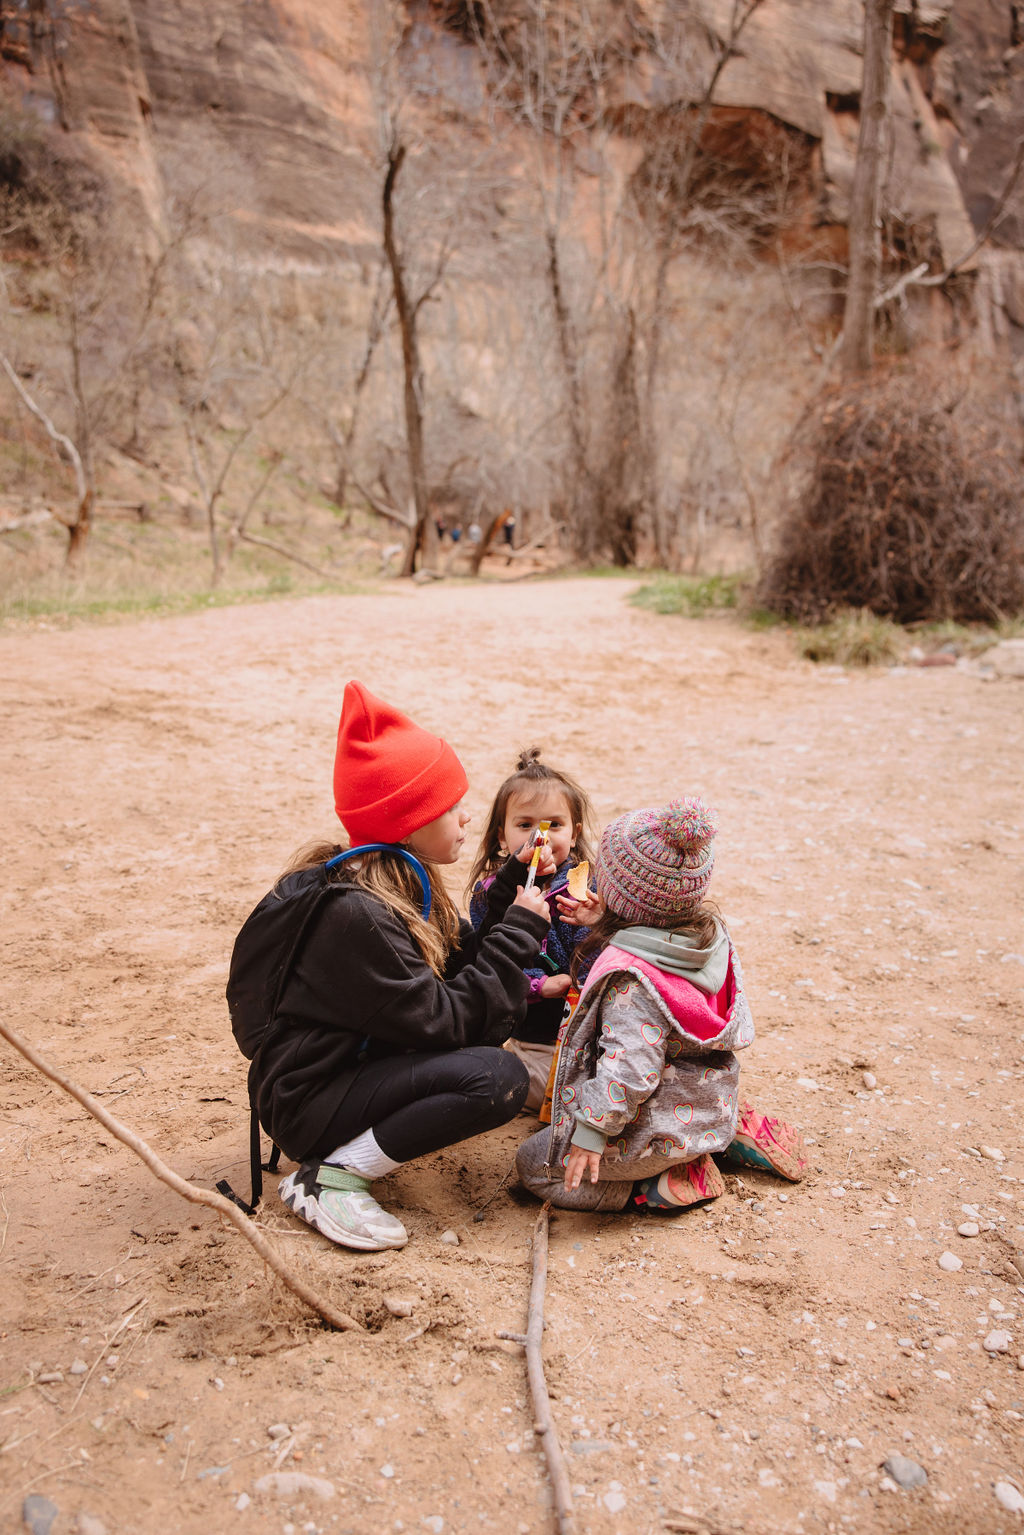 Two young girls and a toddler play on a dirt path with a forested canyon background. one girl wears a red beanie, the other two are in colorful knit hats